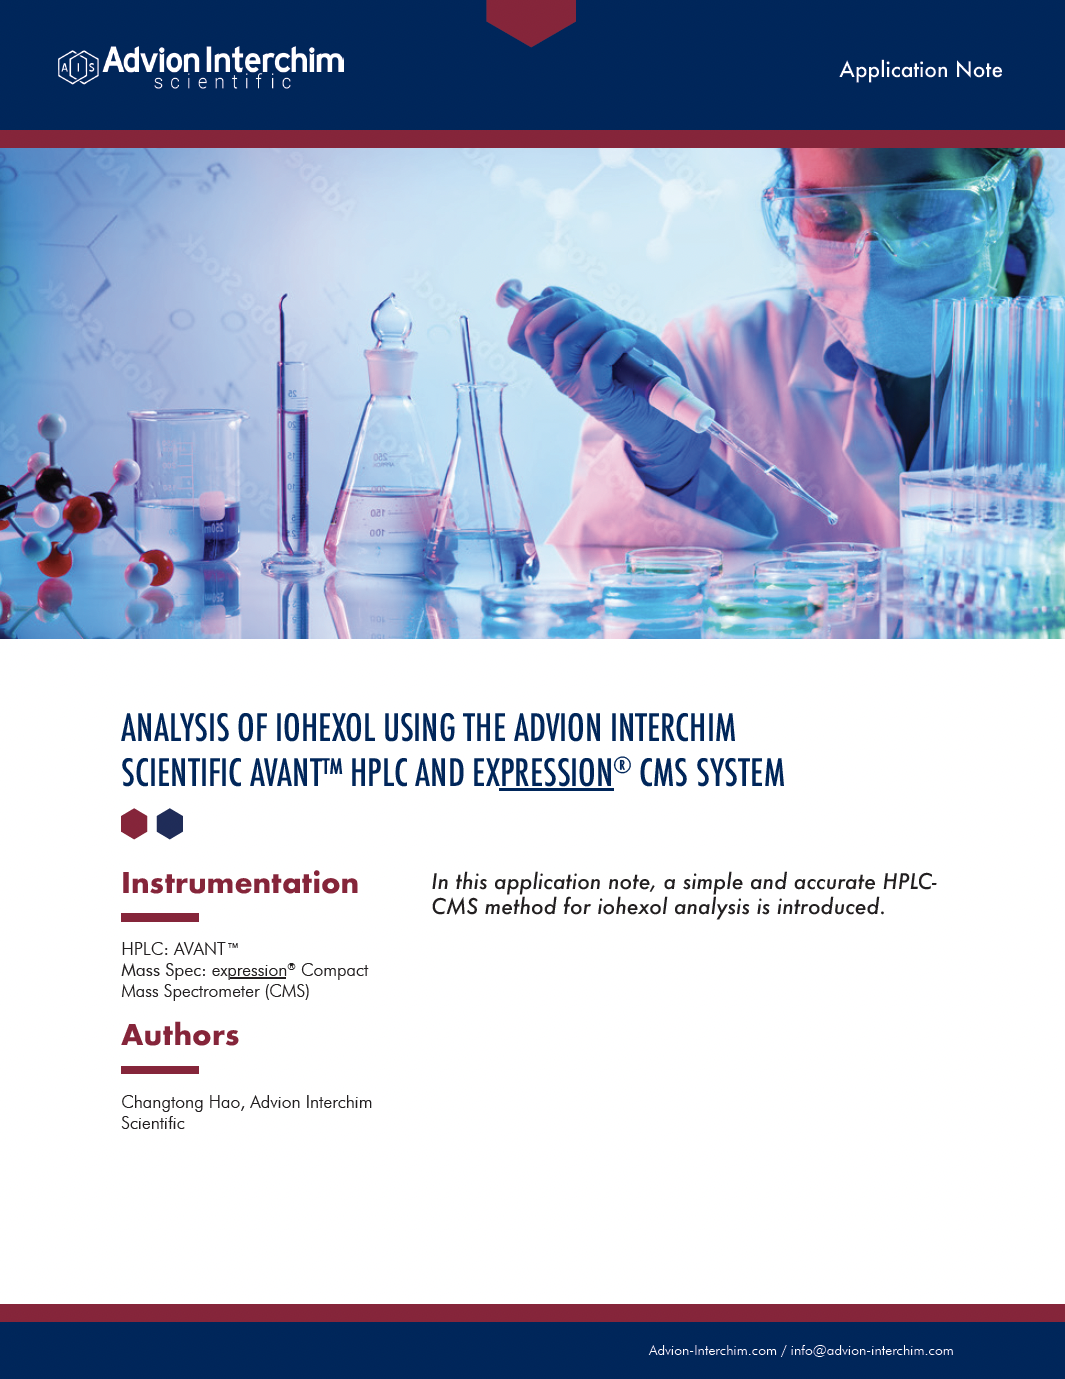 Analysis of Iohexol using the Advion Interchim Scientific AVANT™ HPLC and ex<u>press<strong>ion</strong></u><sup>®</sup> CMS System